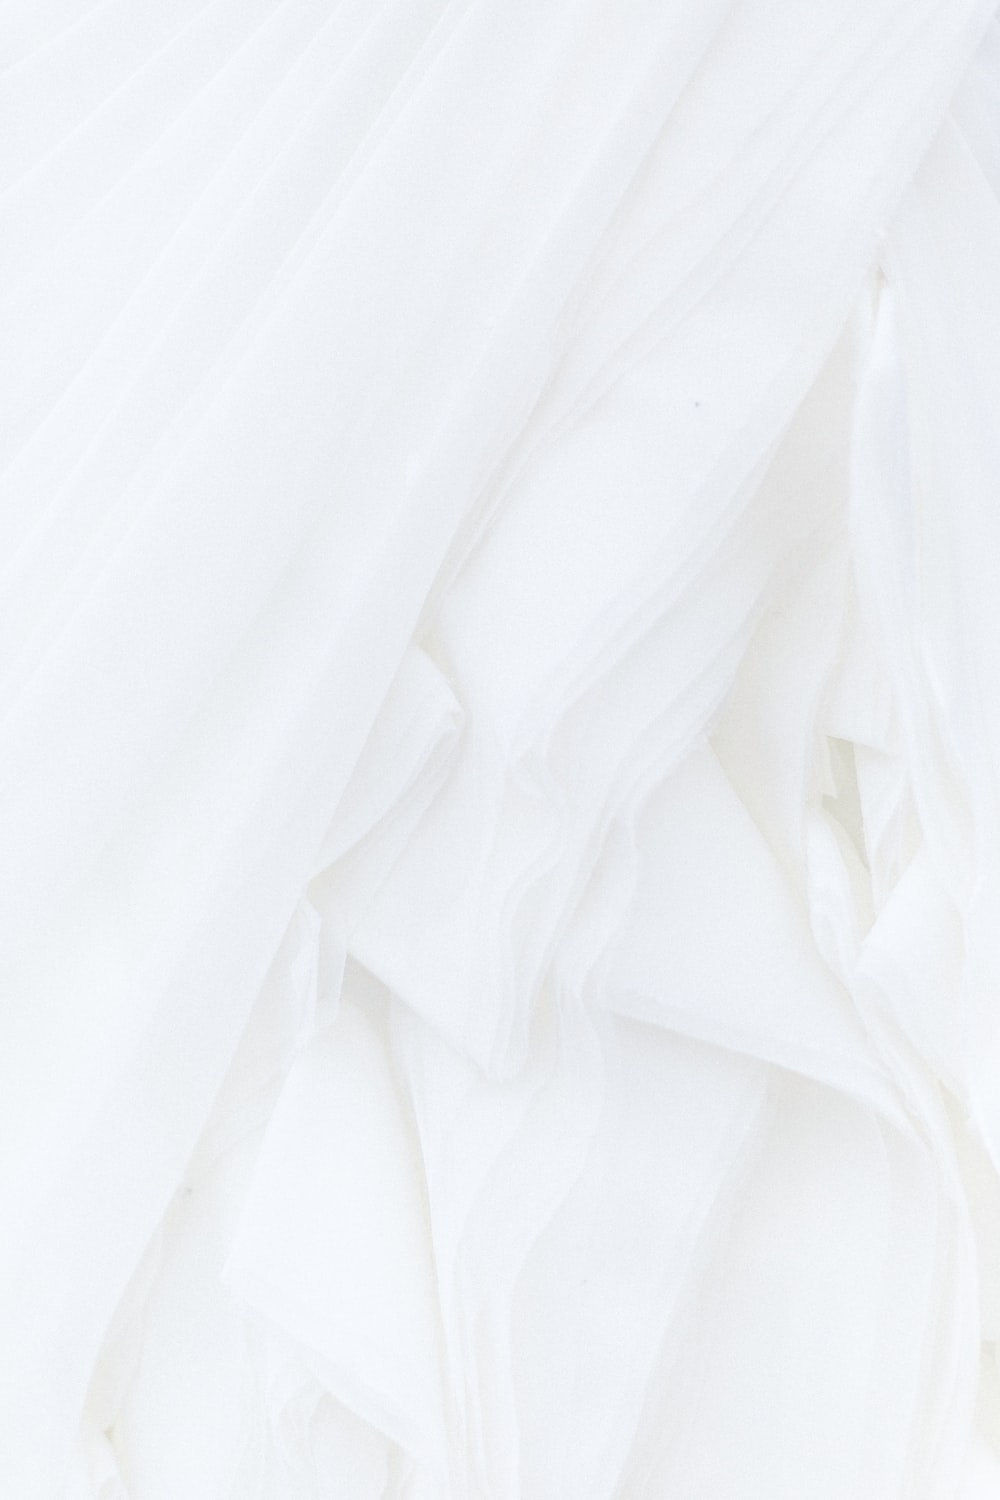 White Cloth Picture. Download Free Image